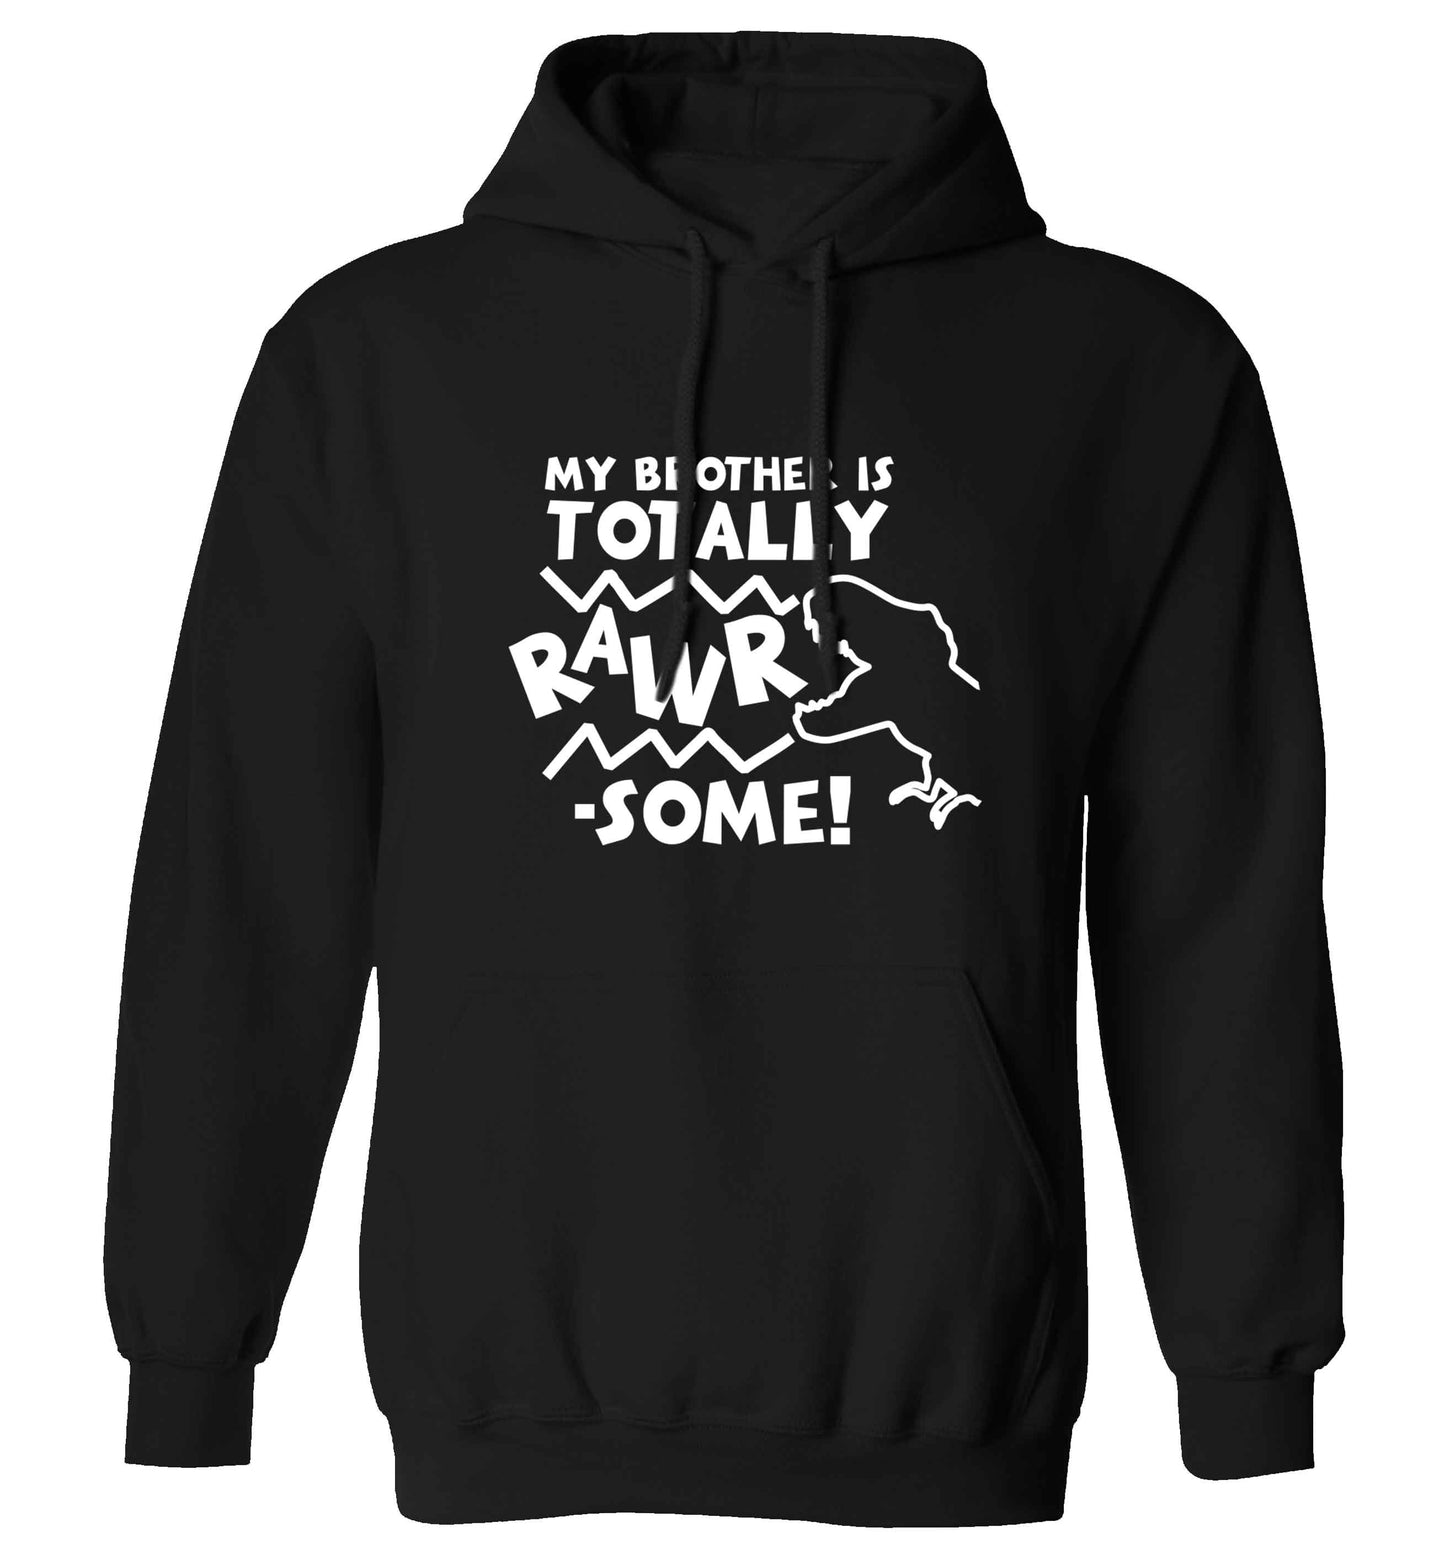 My brother is totally rawrsome adults unisex black hoodie 2XL